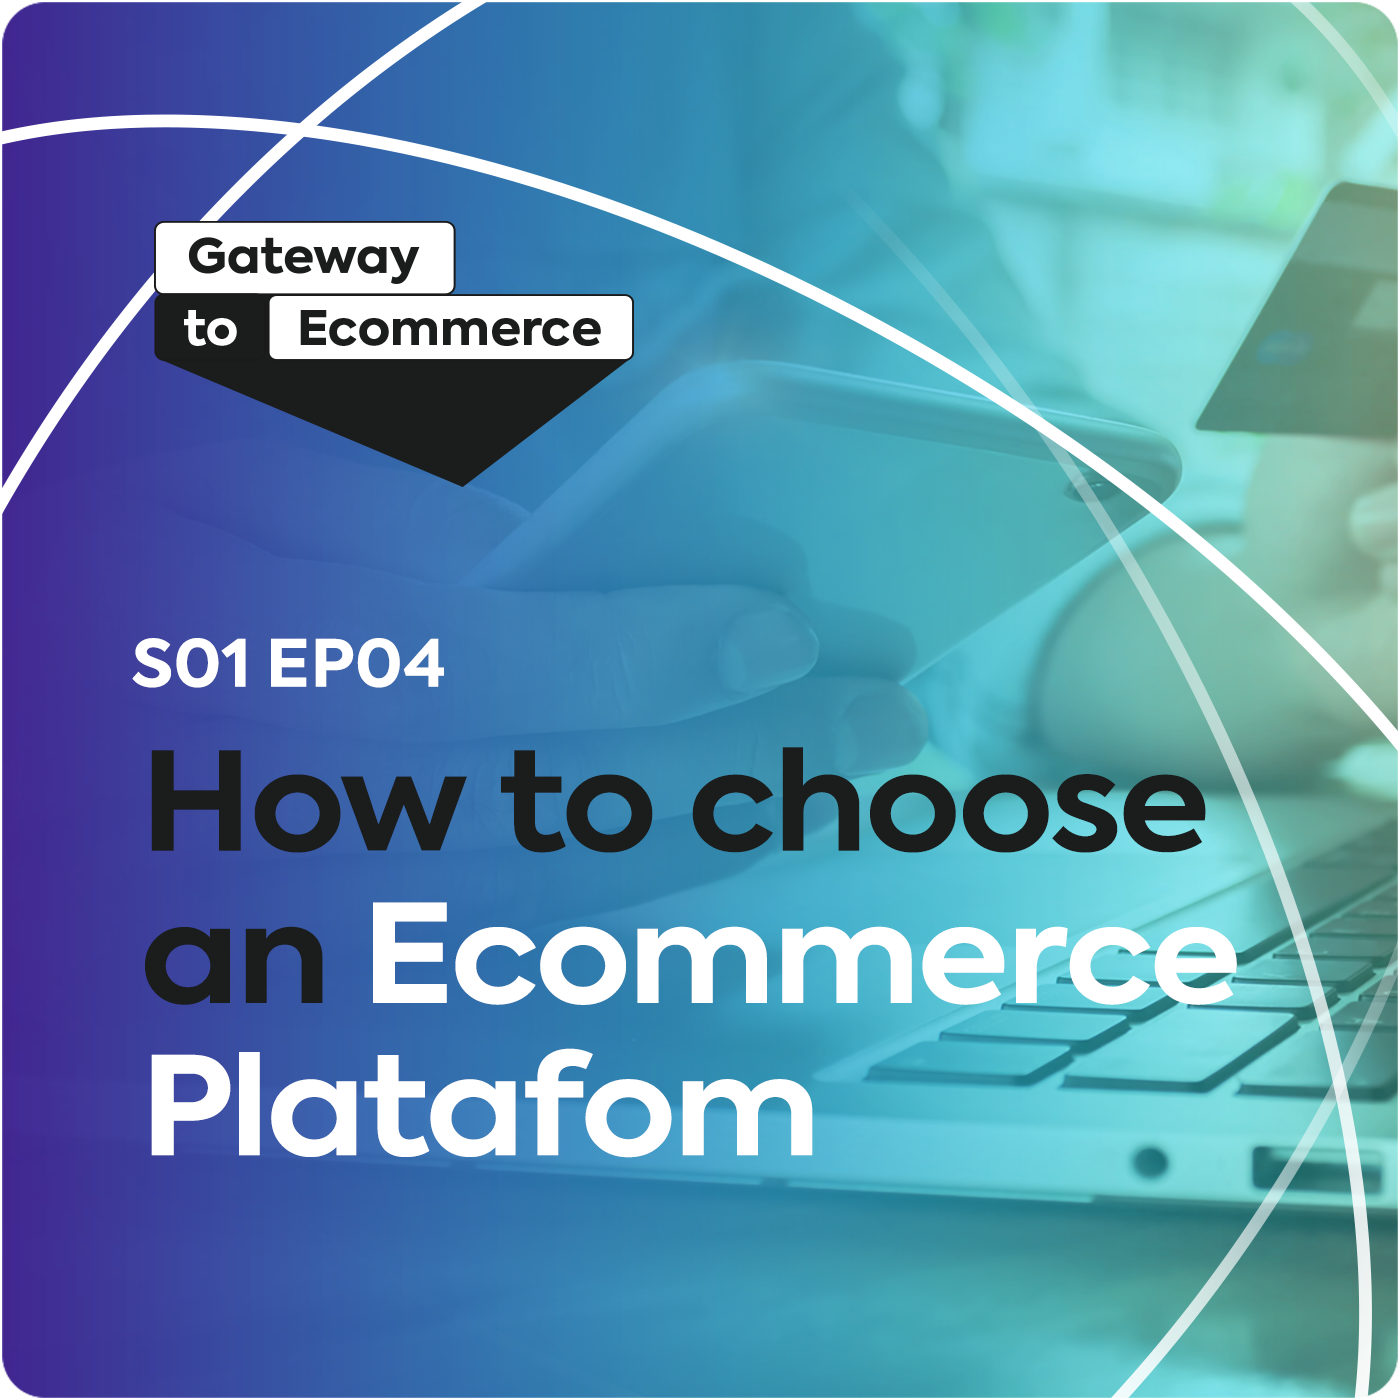 How to Choose and Ecommerce Plataform